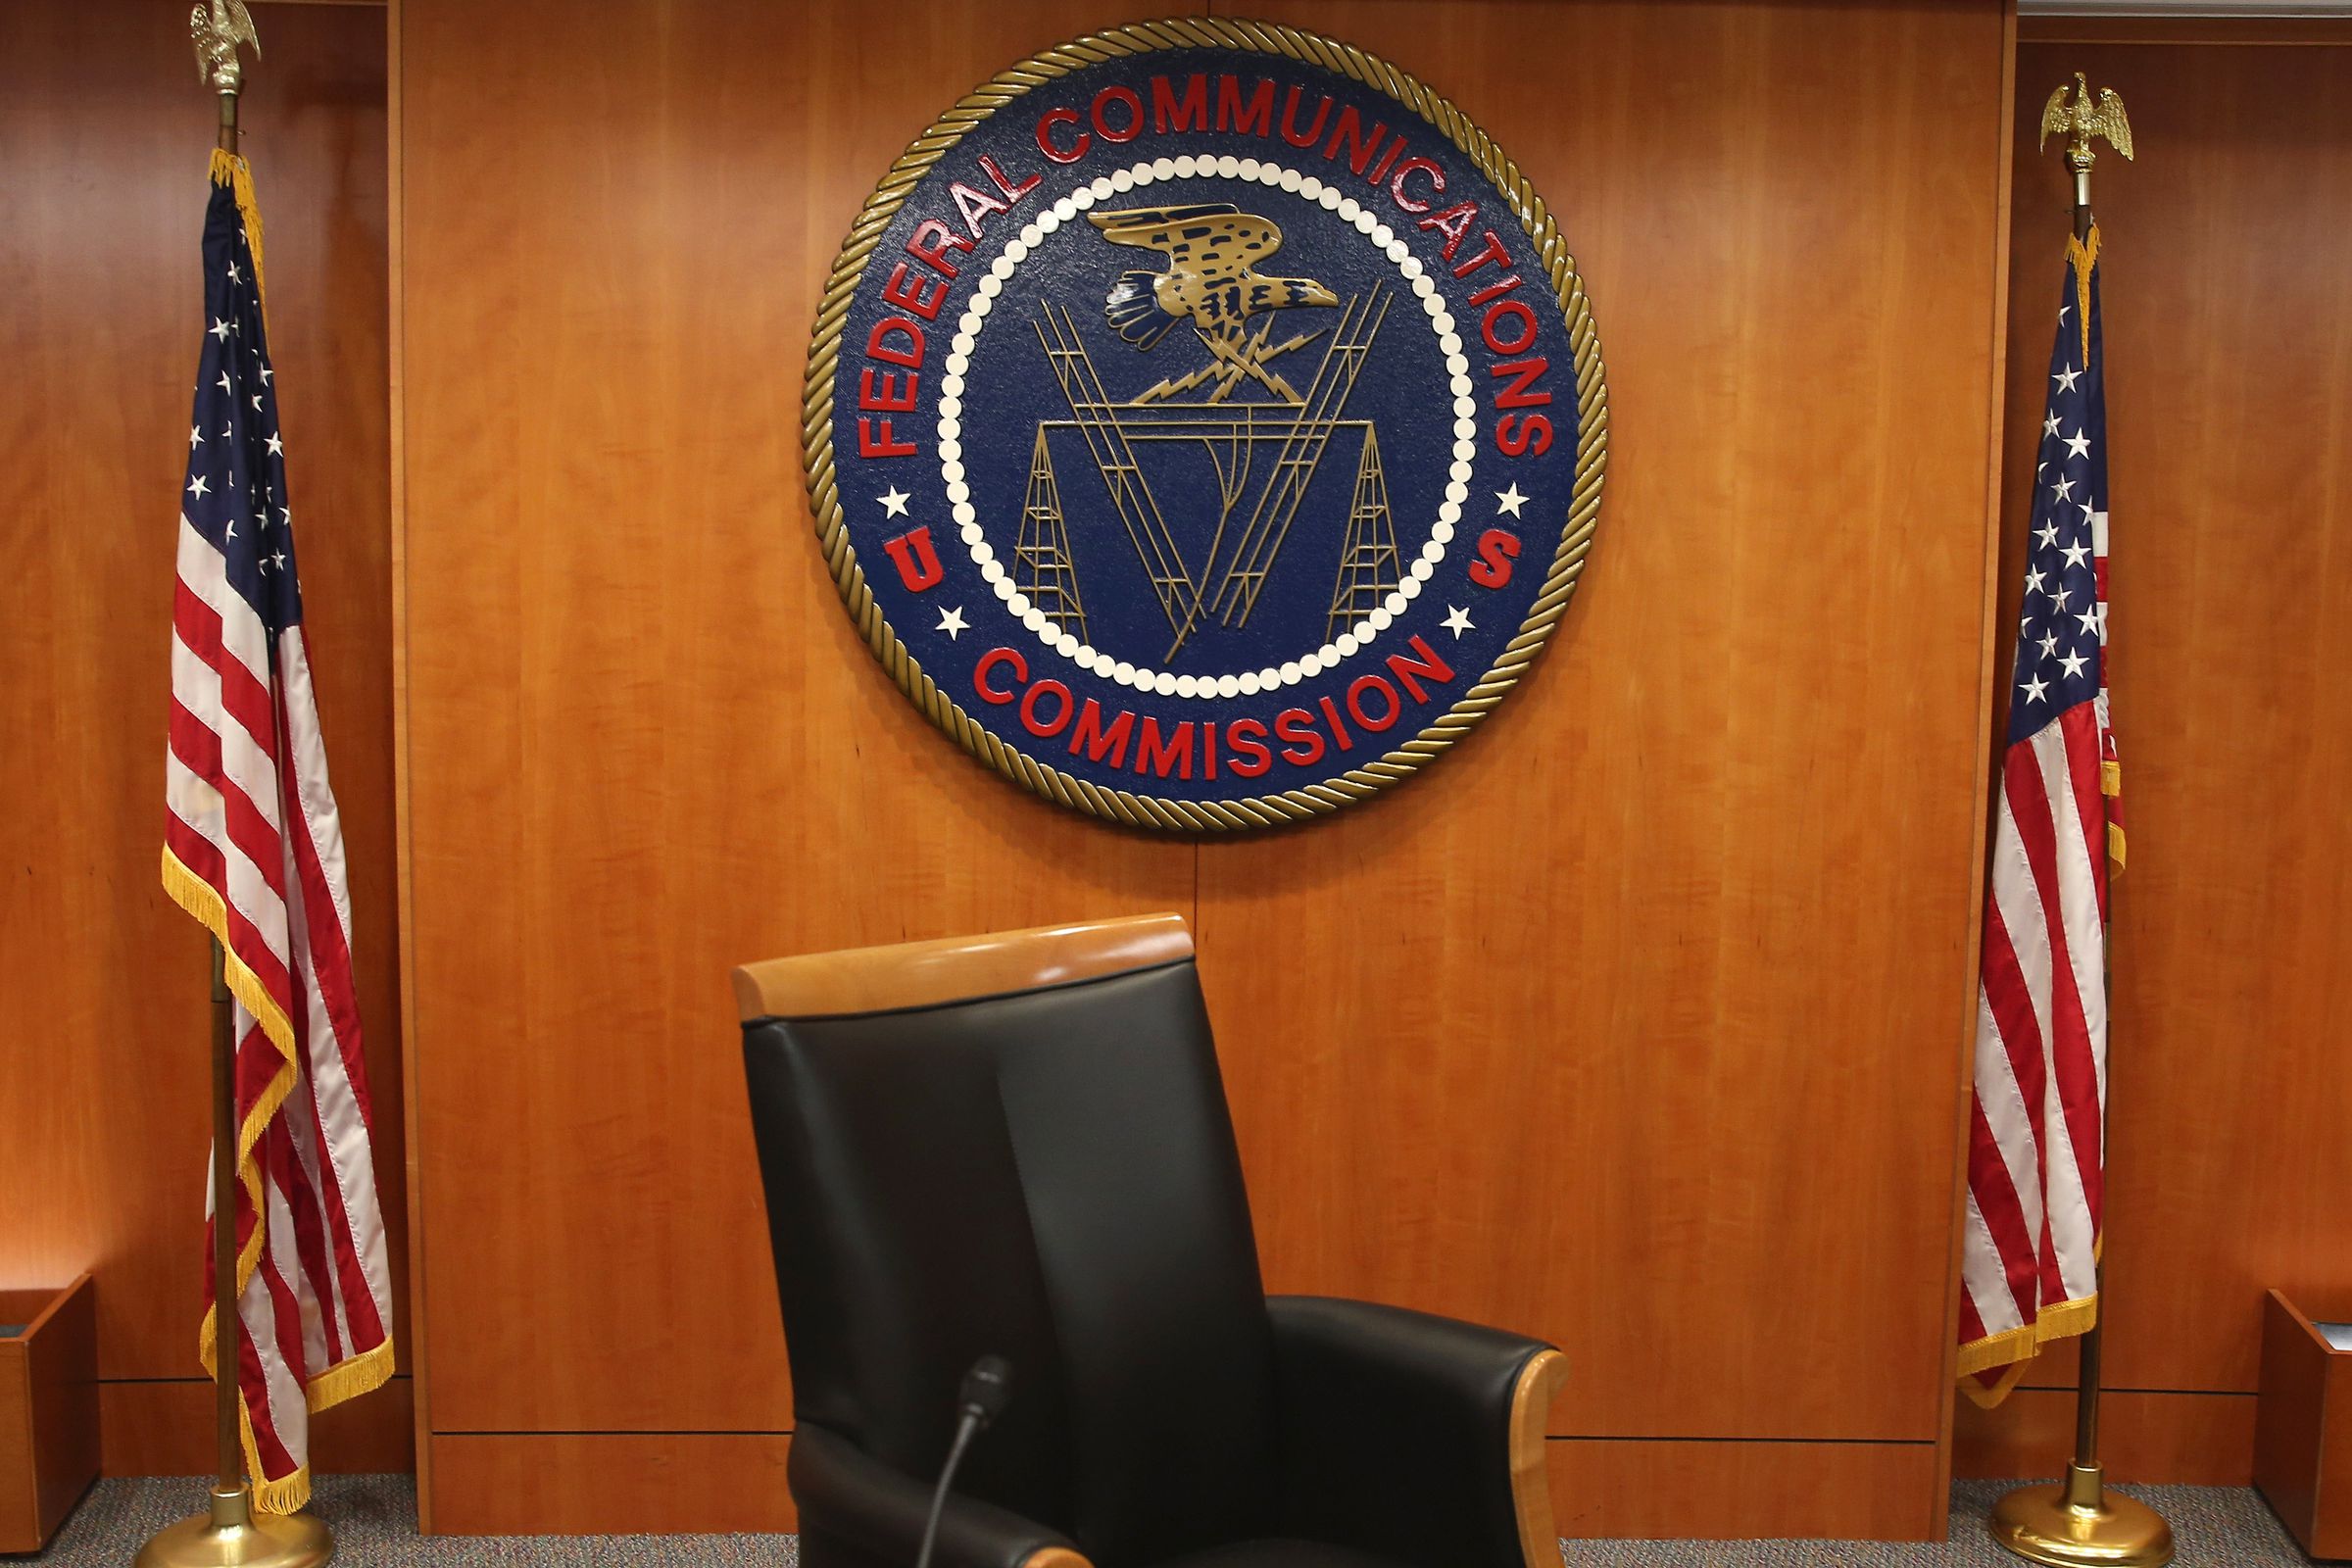 Federal Communications Commission Set To Vote On Net Neutrality